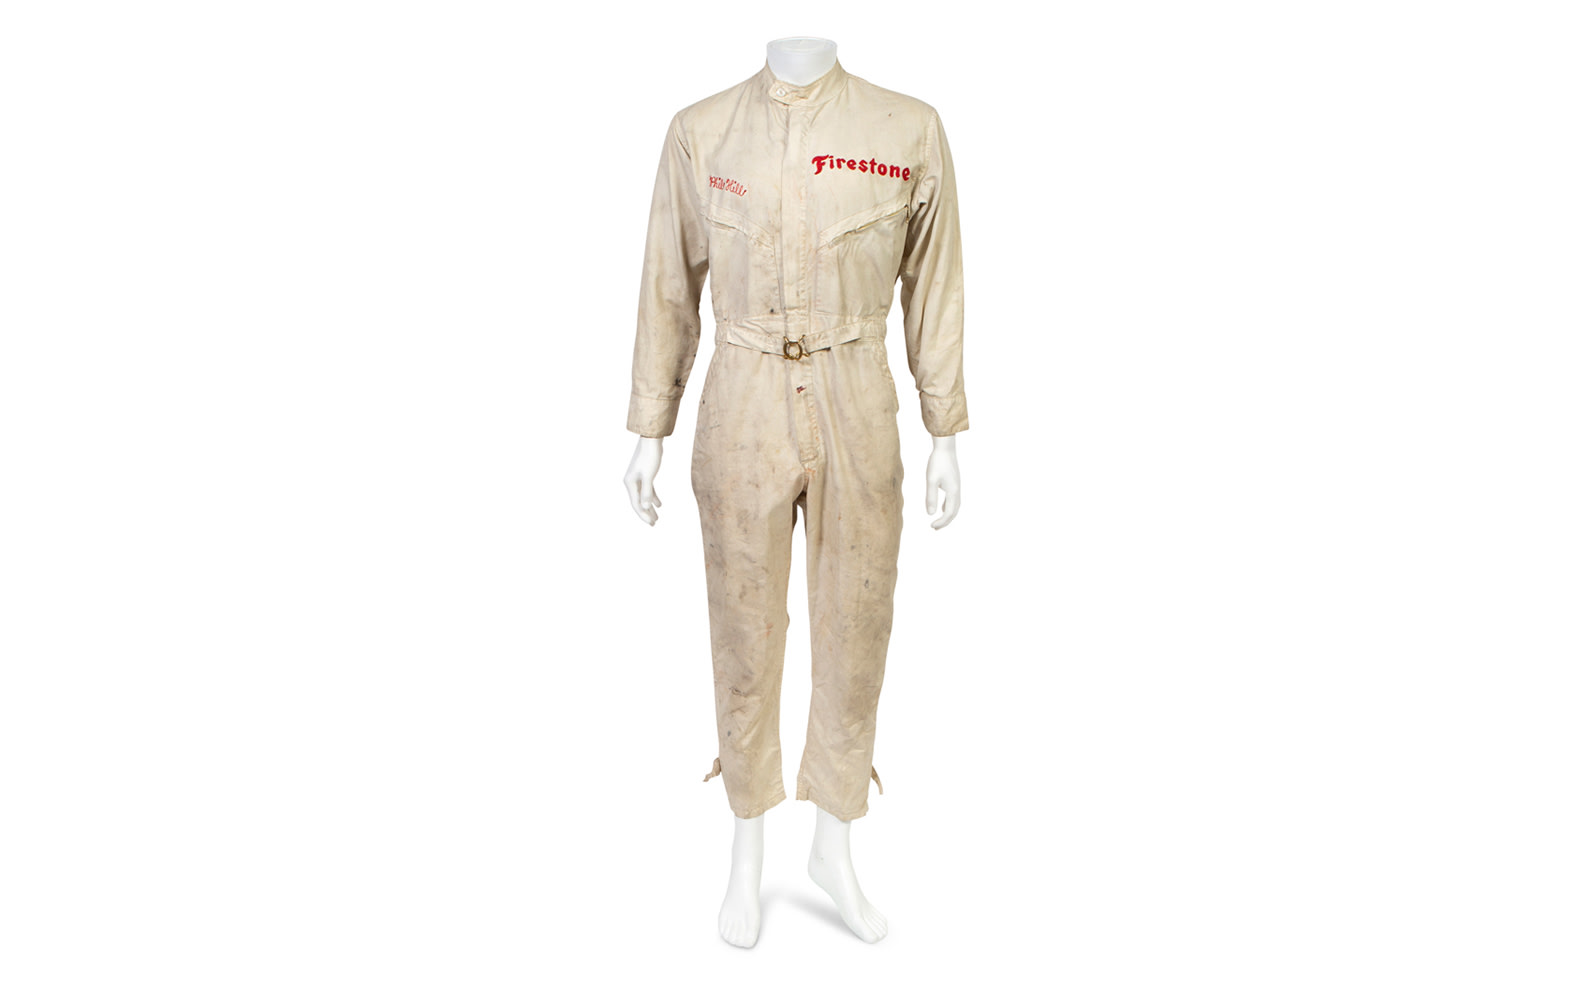 Hinchman One-Piece Driving Suit, Used During Phil Hill's Time with the Chaparral Racing Team